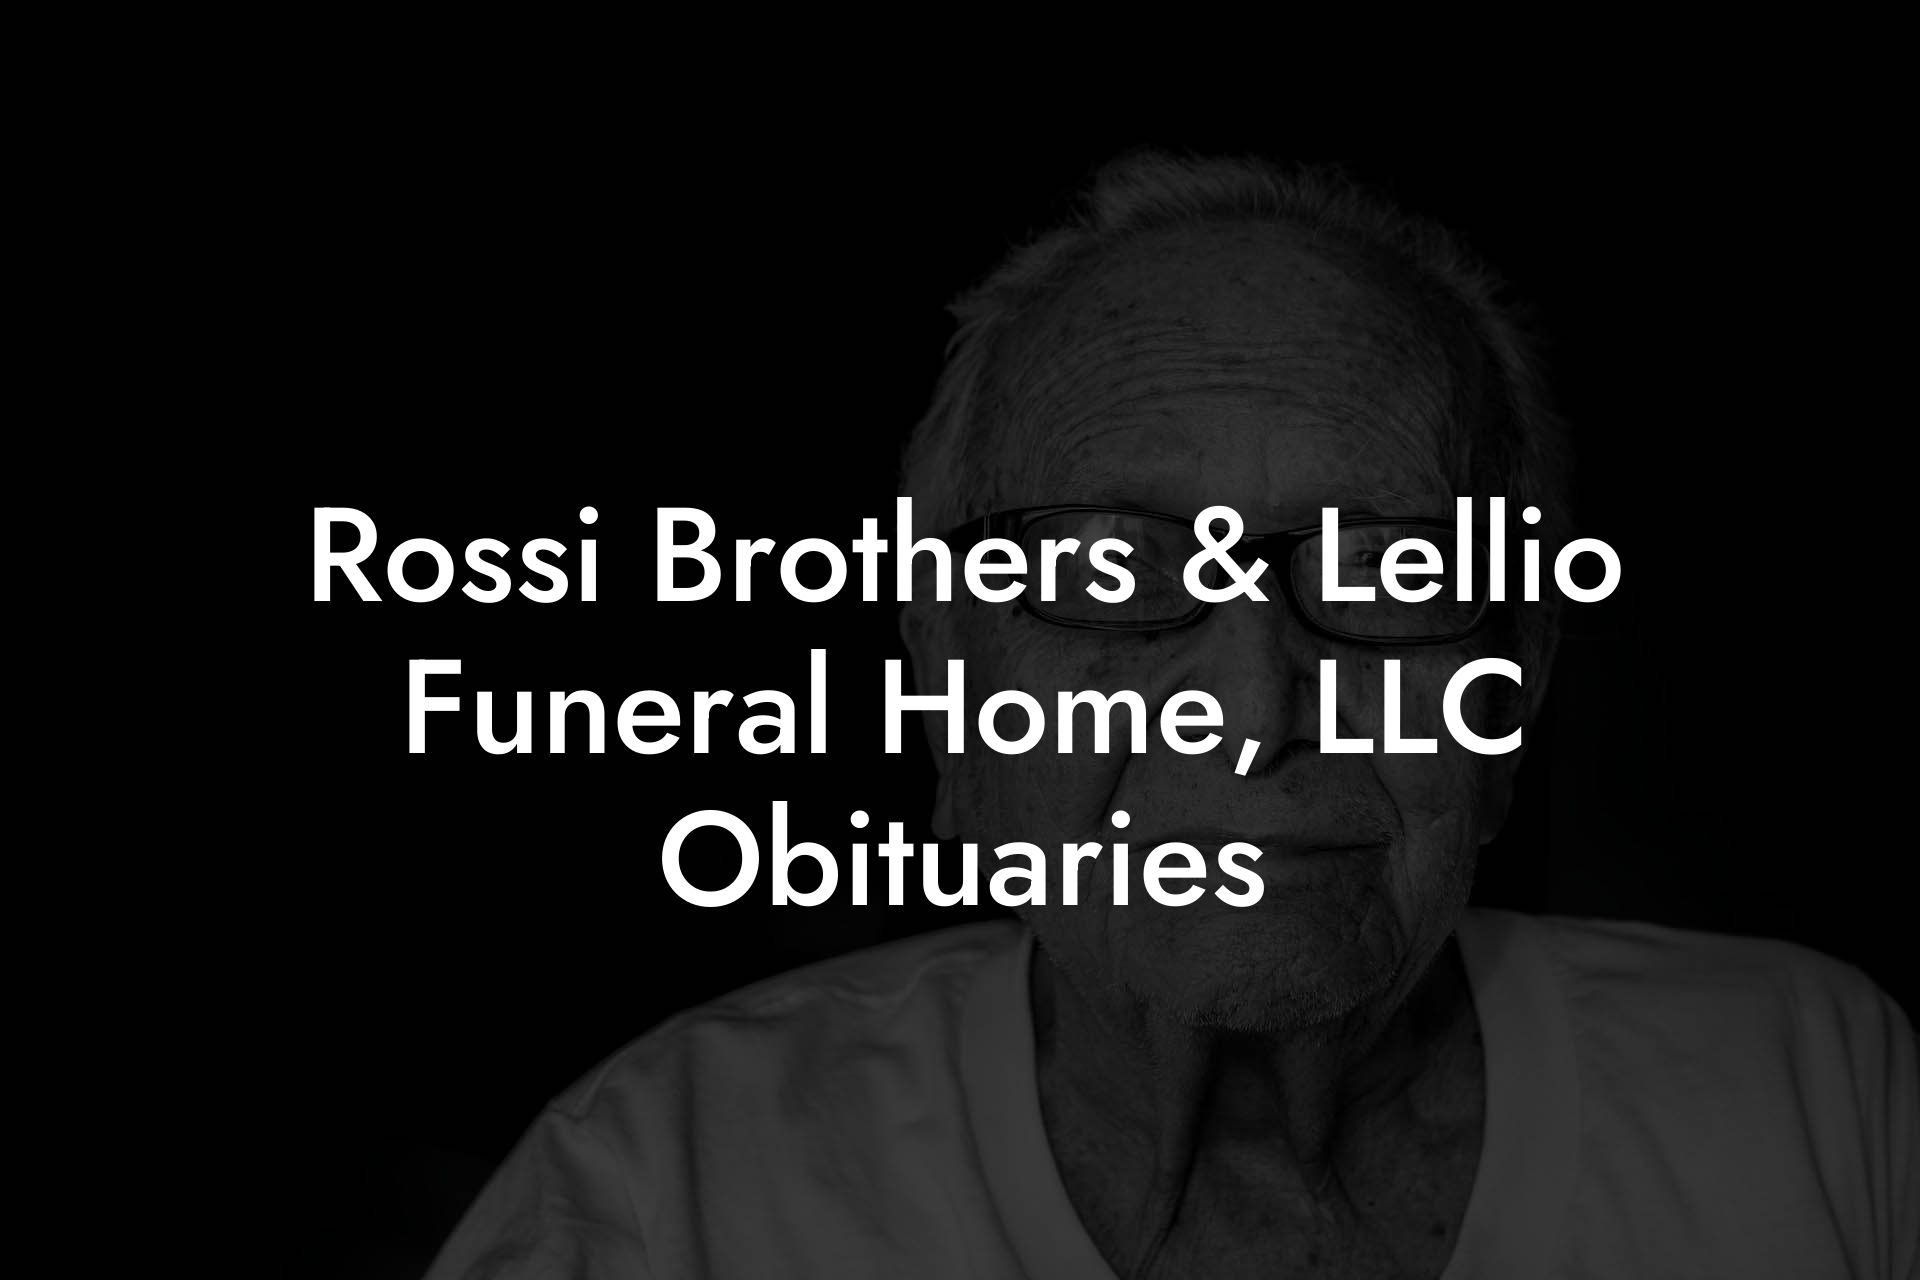 Rossi Brothers & Lellio Funeral Home, LLC Obituaries